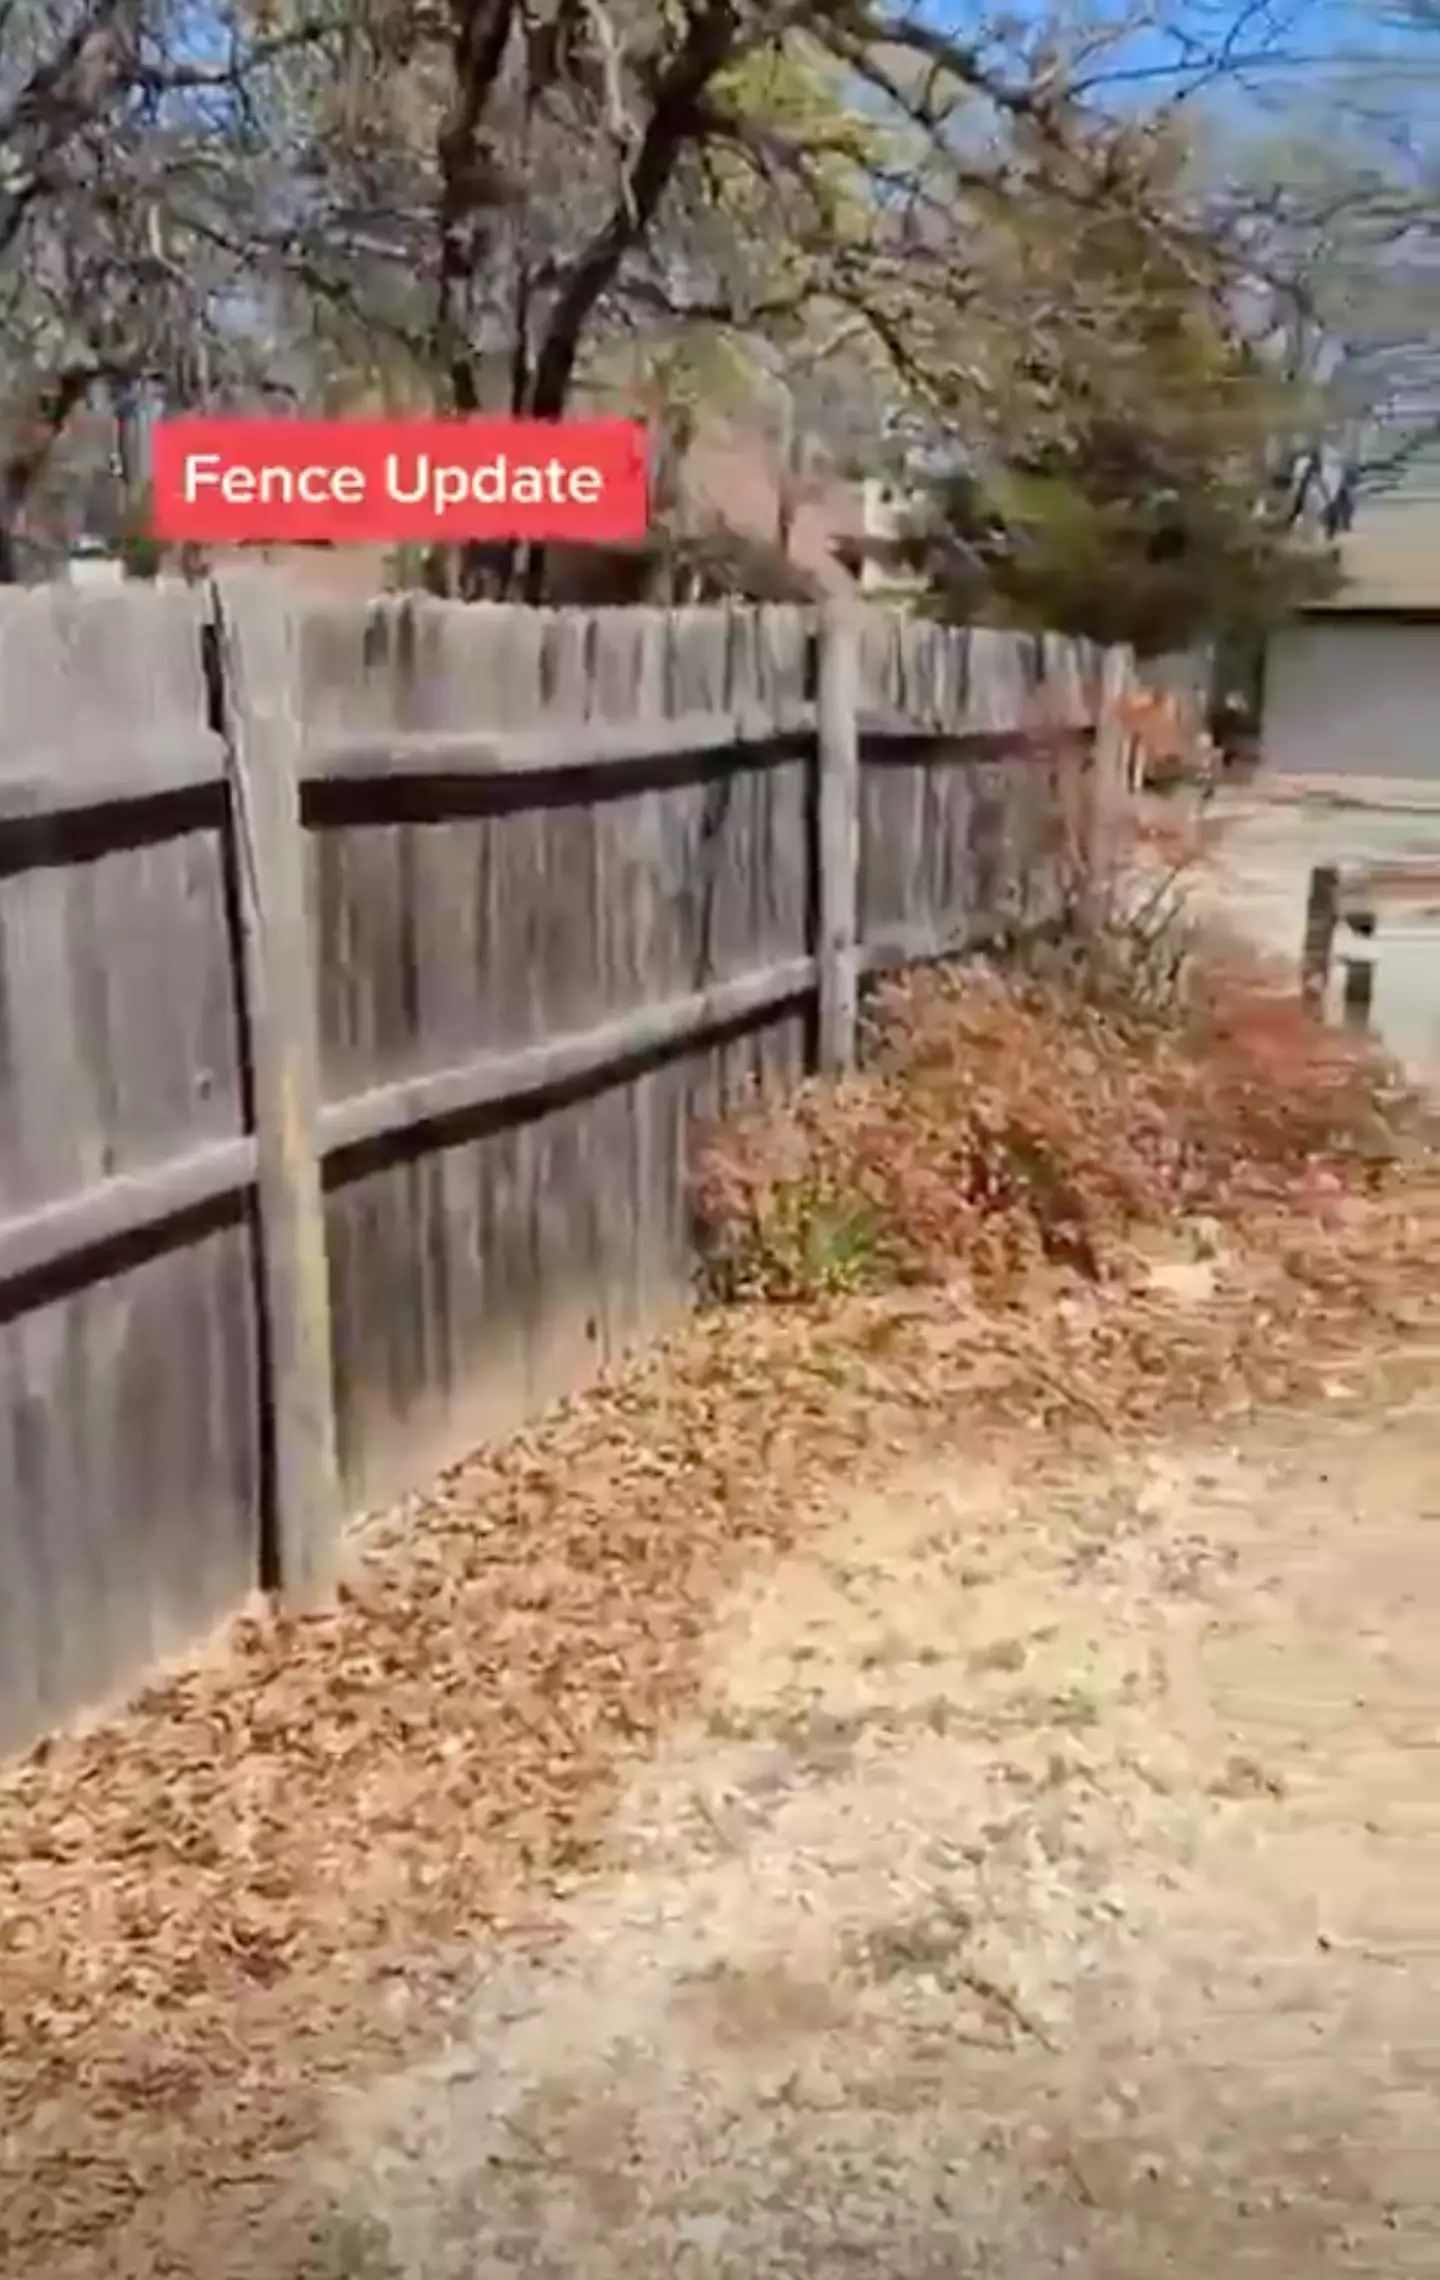 The man feared the old fence would 'fall down'.